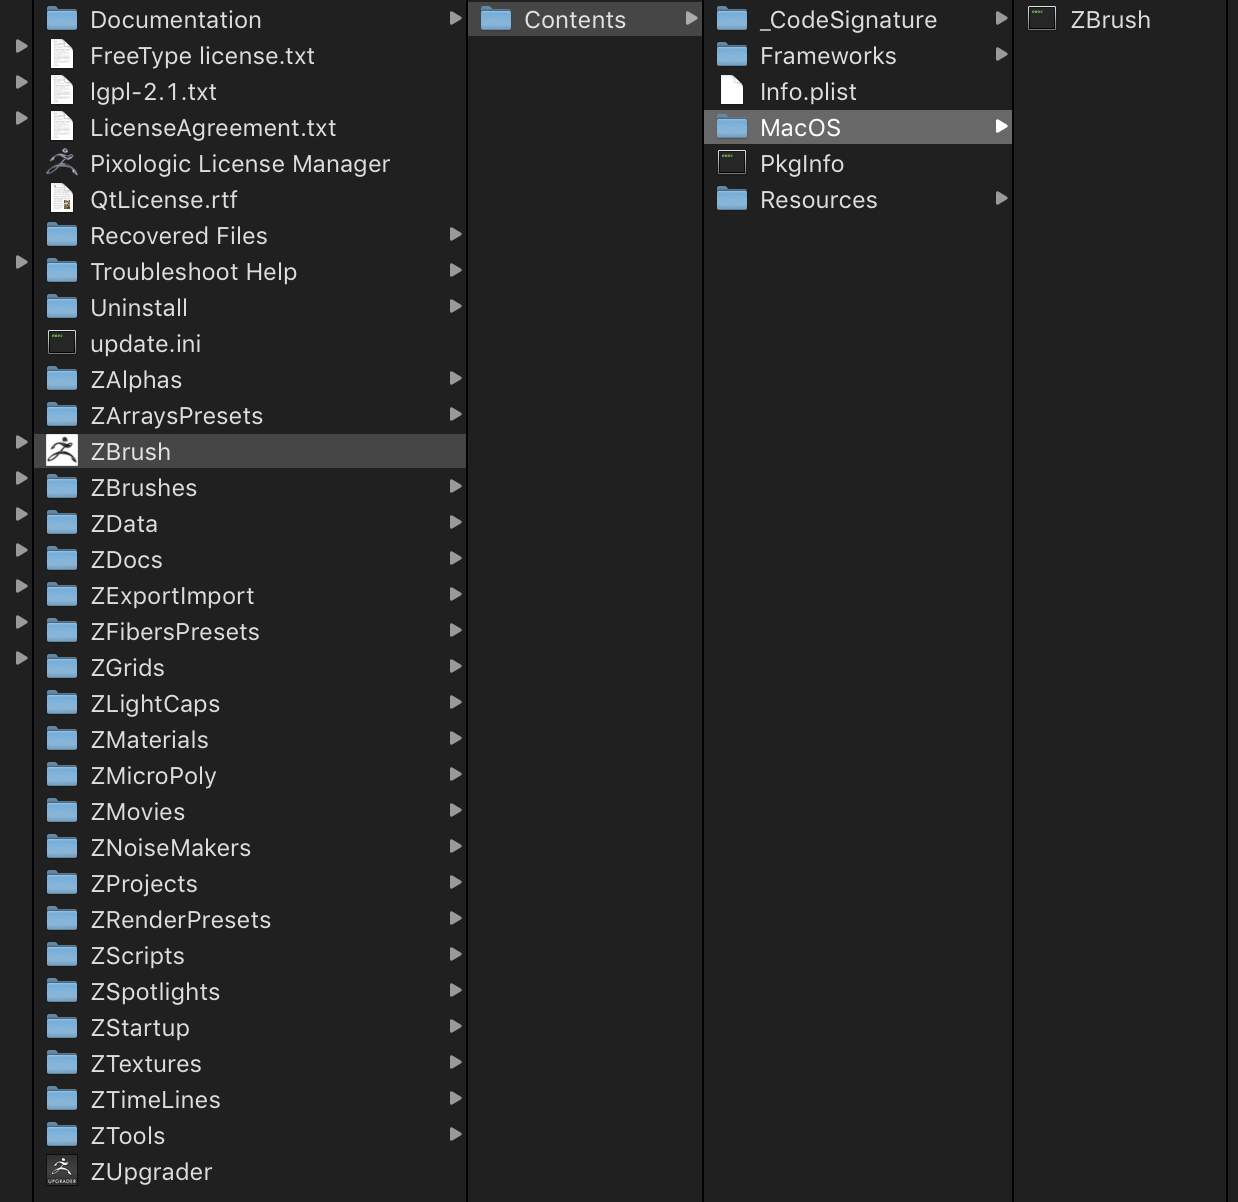 Zbrush App Contents Macos